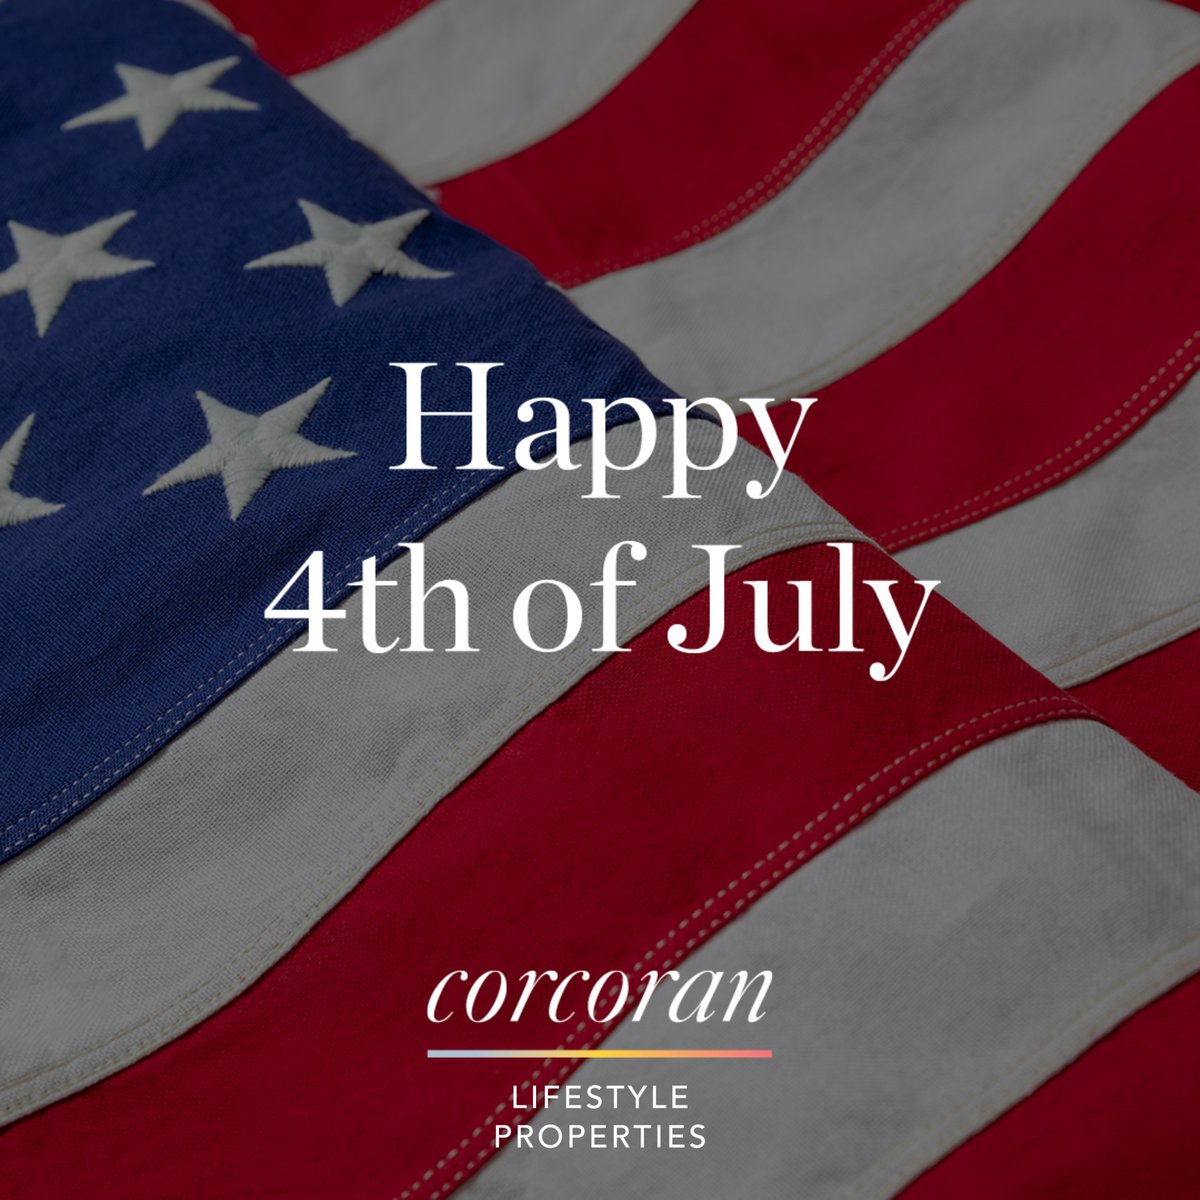 Happy 4th of July! Let's embrace the spirit of liberty, unity, and gratitude on this special day. Have a safe and memorable celebration!

#thecorcorangroup #corcoran #corcoranlifestyleproperties #independenceday